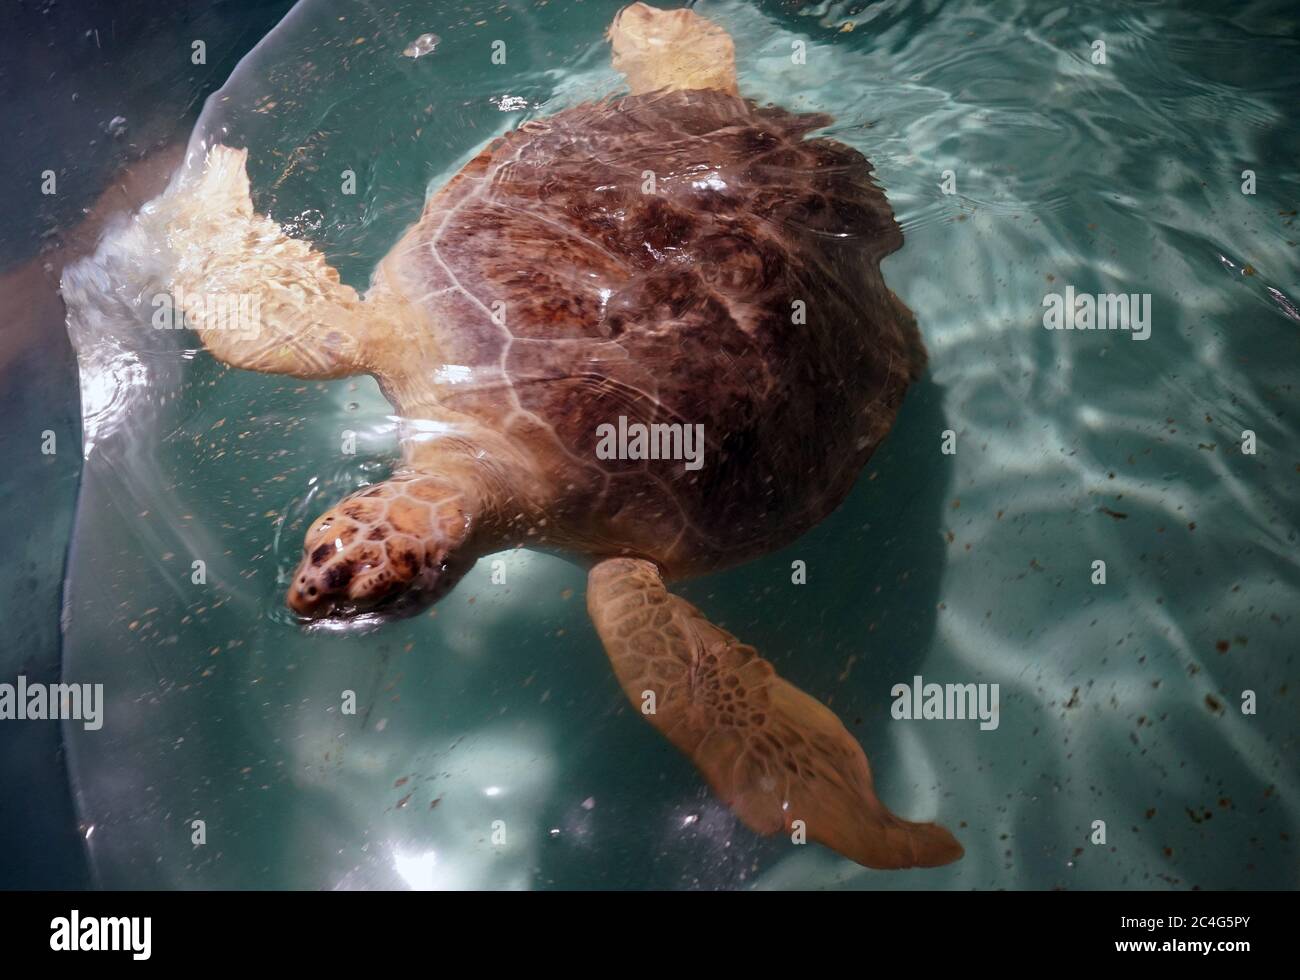 St. Louis, United States. 26th June, 2020. Tsunami the sea turtle swims in his tank at the St. Louis Aquarium in St. Louis on Friday, June 26, 2020. The green sea turtle was rescued off the coast of Georgia after he was hit by a boat in 2017, and will be released into the large tank with other fish, on July 1, 2020. Photo by Bill Greenblatt/UPI Credit: UPI/Alamy Live News Stock Photo